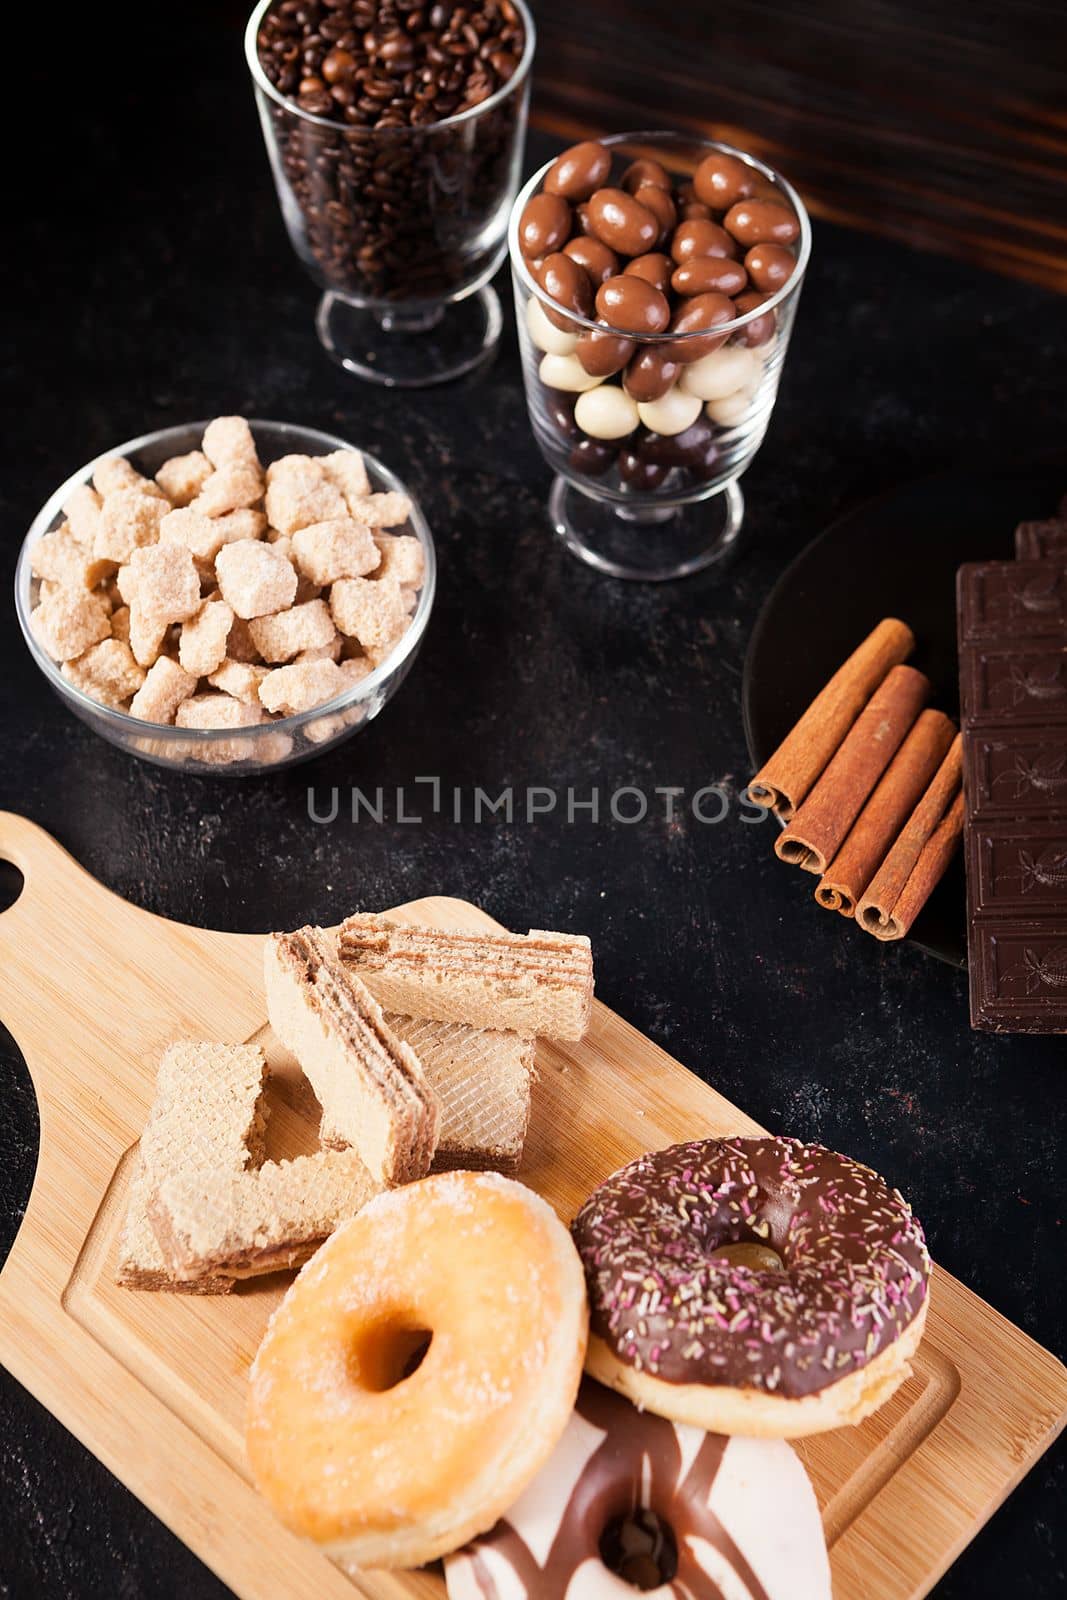 Donuts, peanuts in chocolate and coffee beans by DCStudio